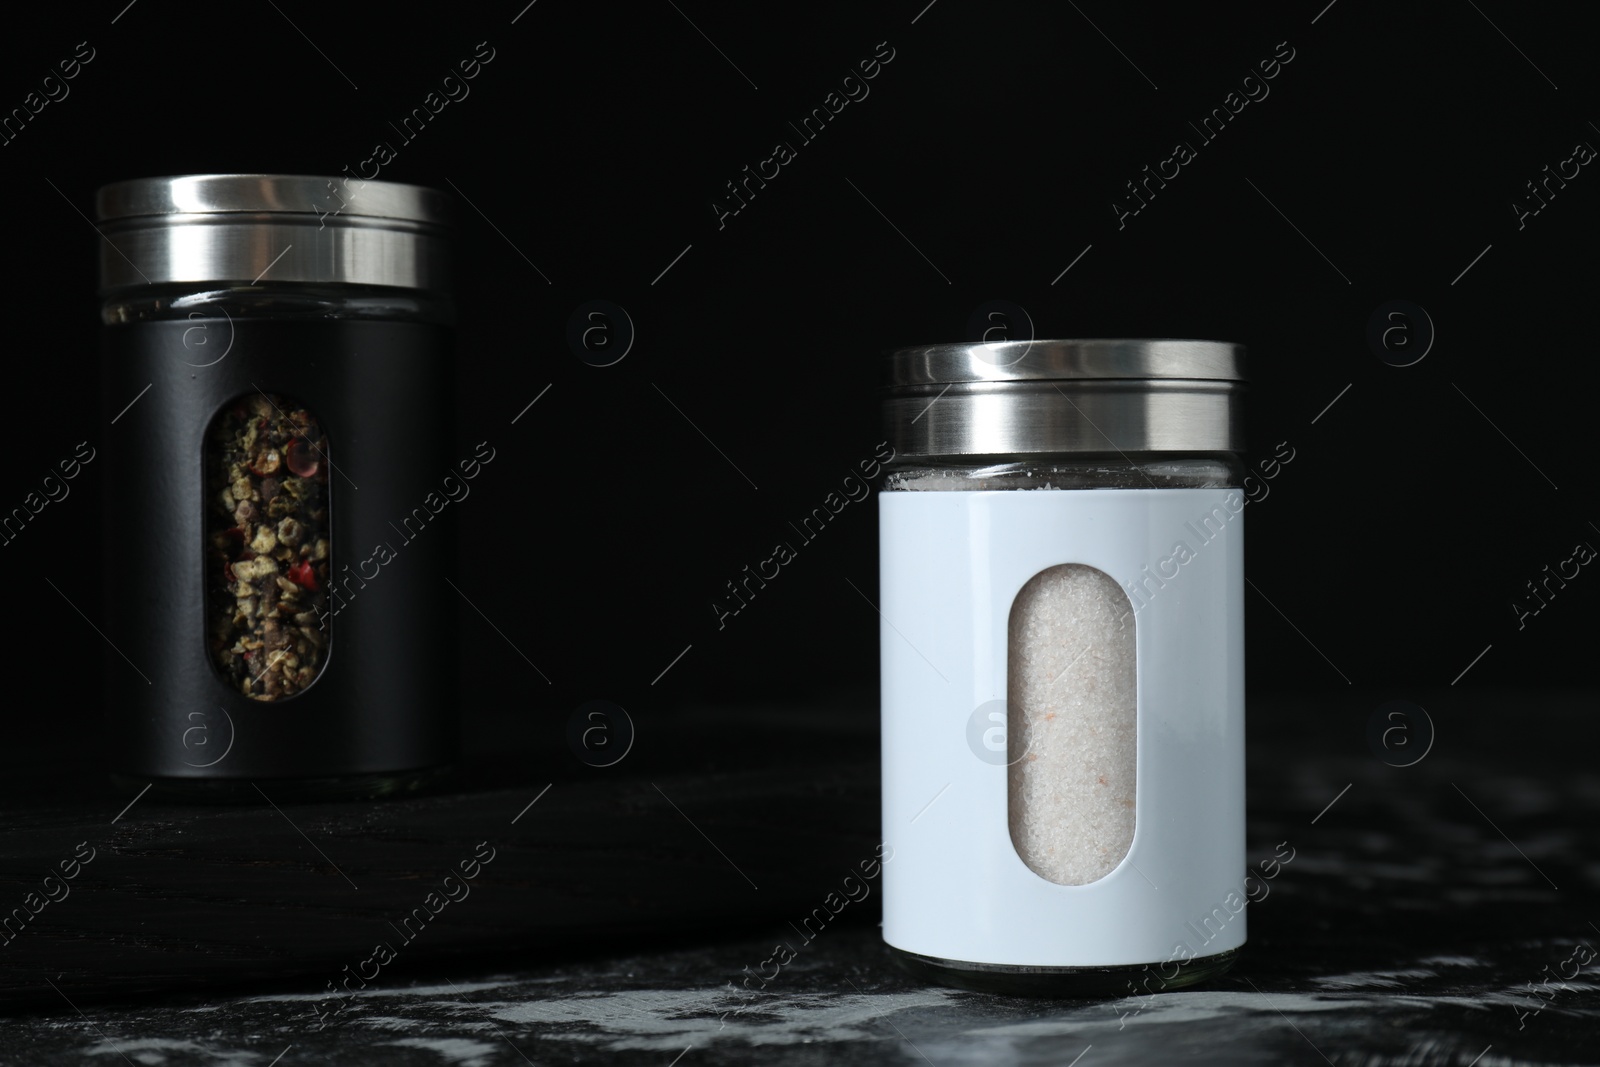 Photo of Salt and pepper shakers on dark table against black background